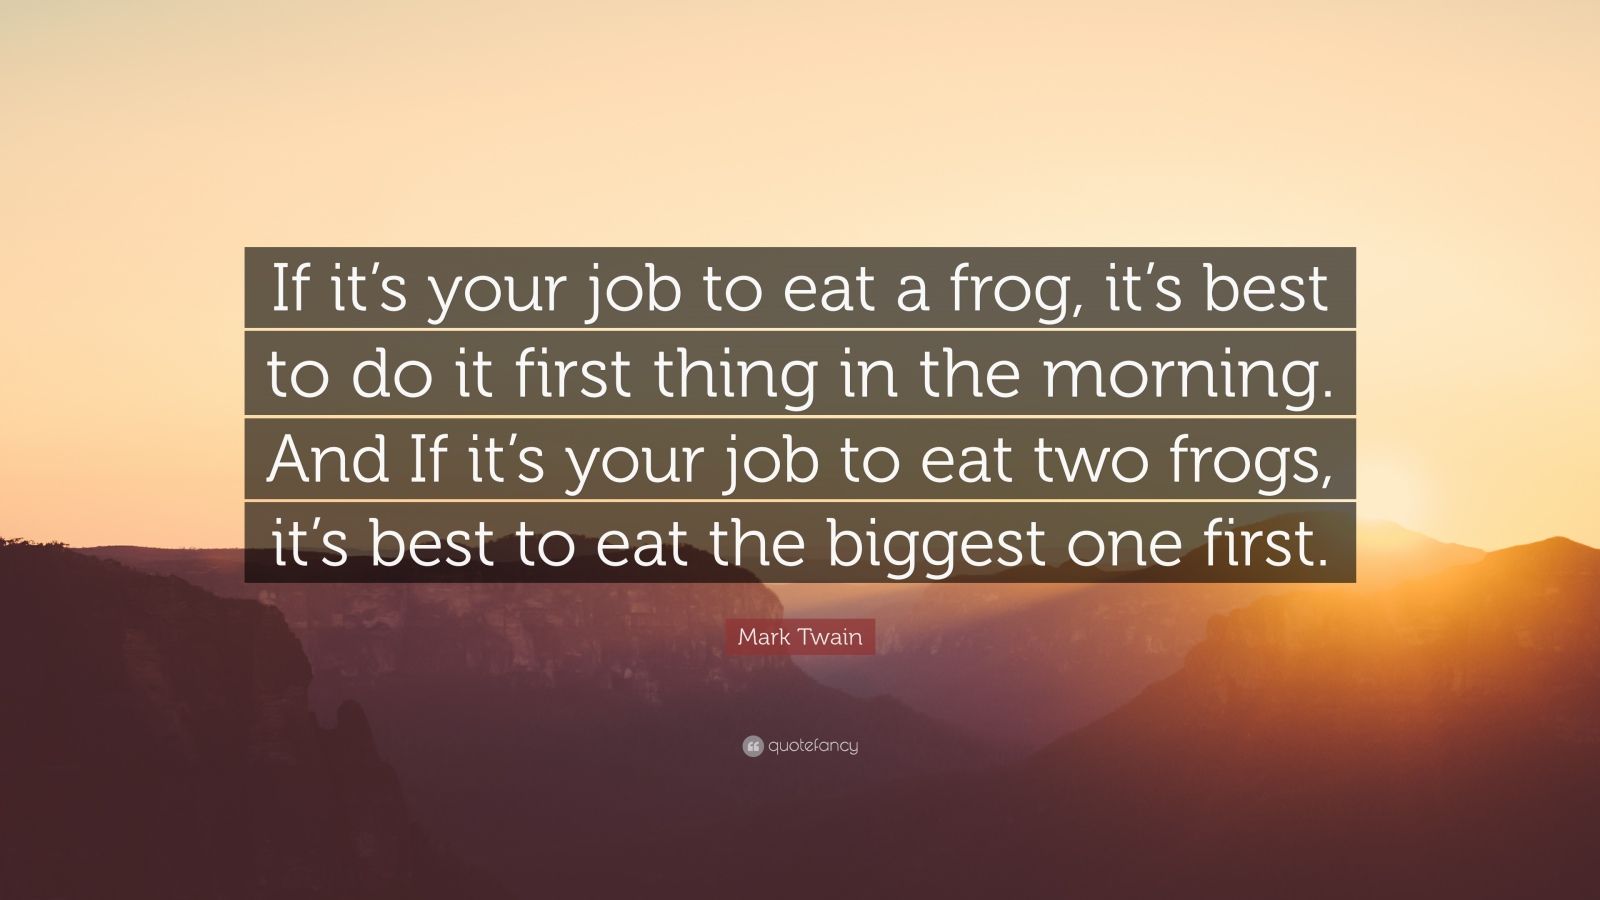 Mark Twain Quote: “If it’s your job to eat a frog, it’s best to do it